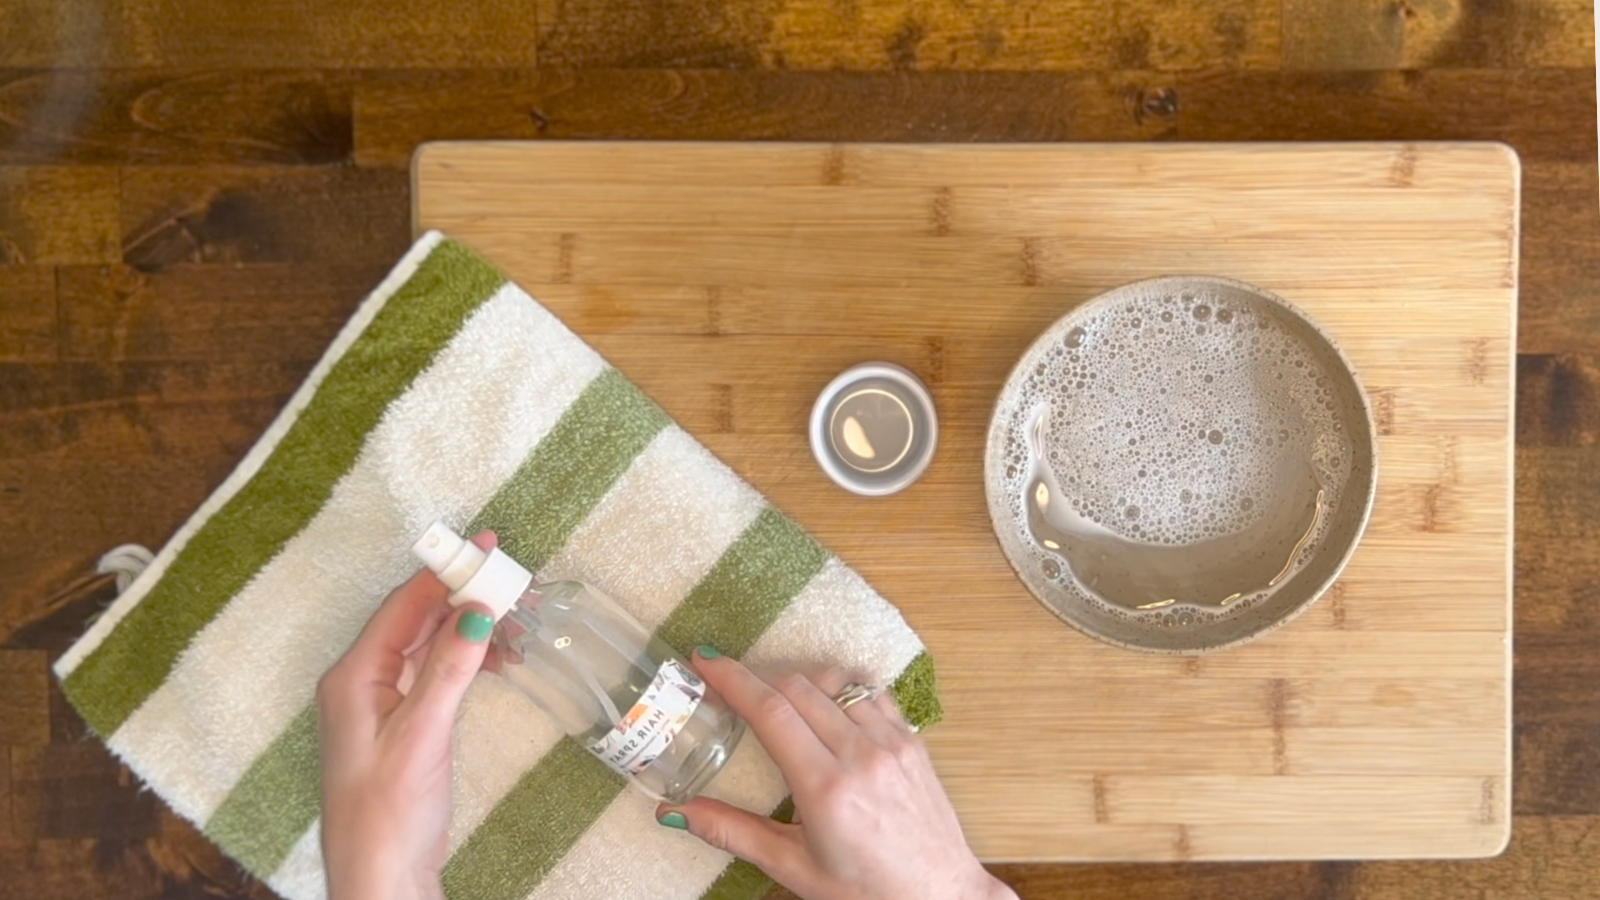 Load video: How to clean and sanitize old bottles and jars.